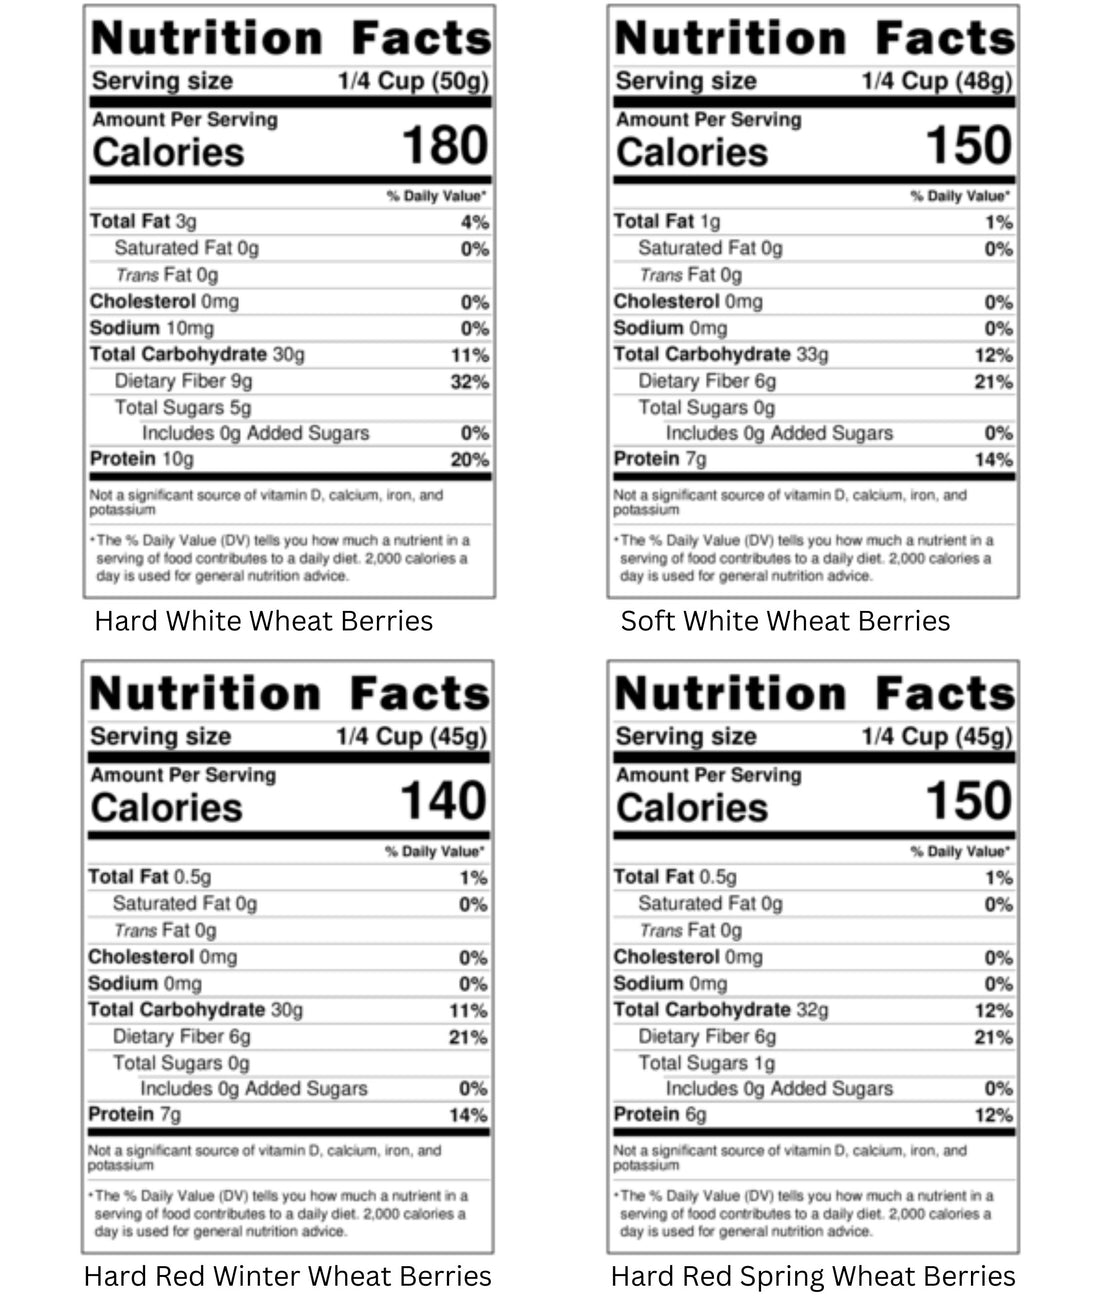 Nutrition Facts for Washington State Grown Soft White Wheat Berries, Hard White Wheat Berries, Hard Red Spring Wheat Berries and Hard Red Winter Wheat Berries